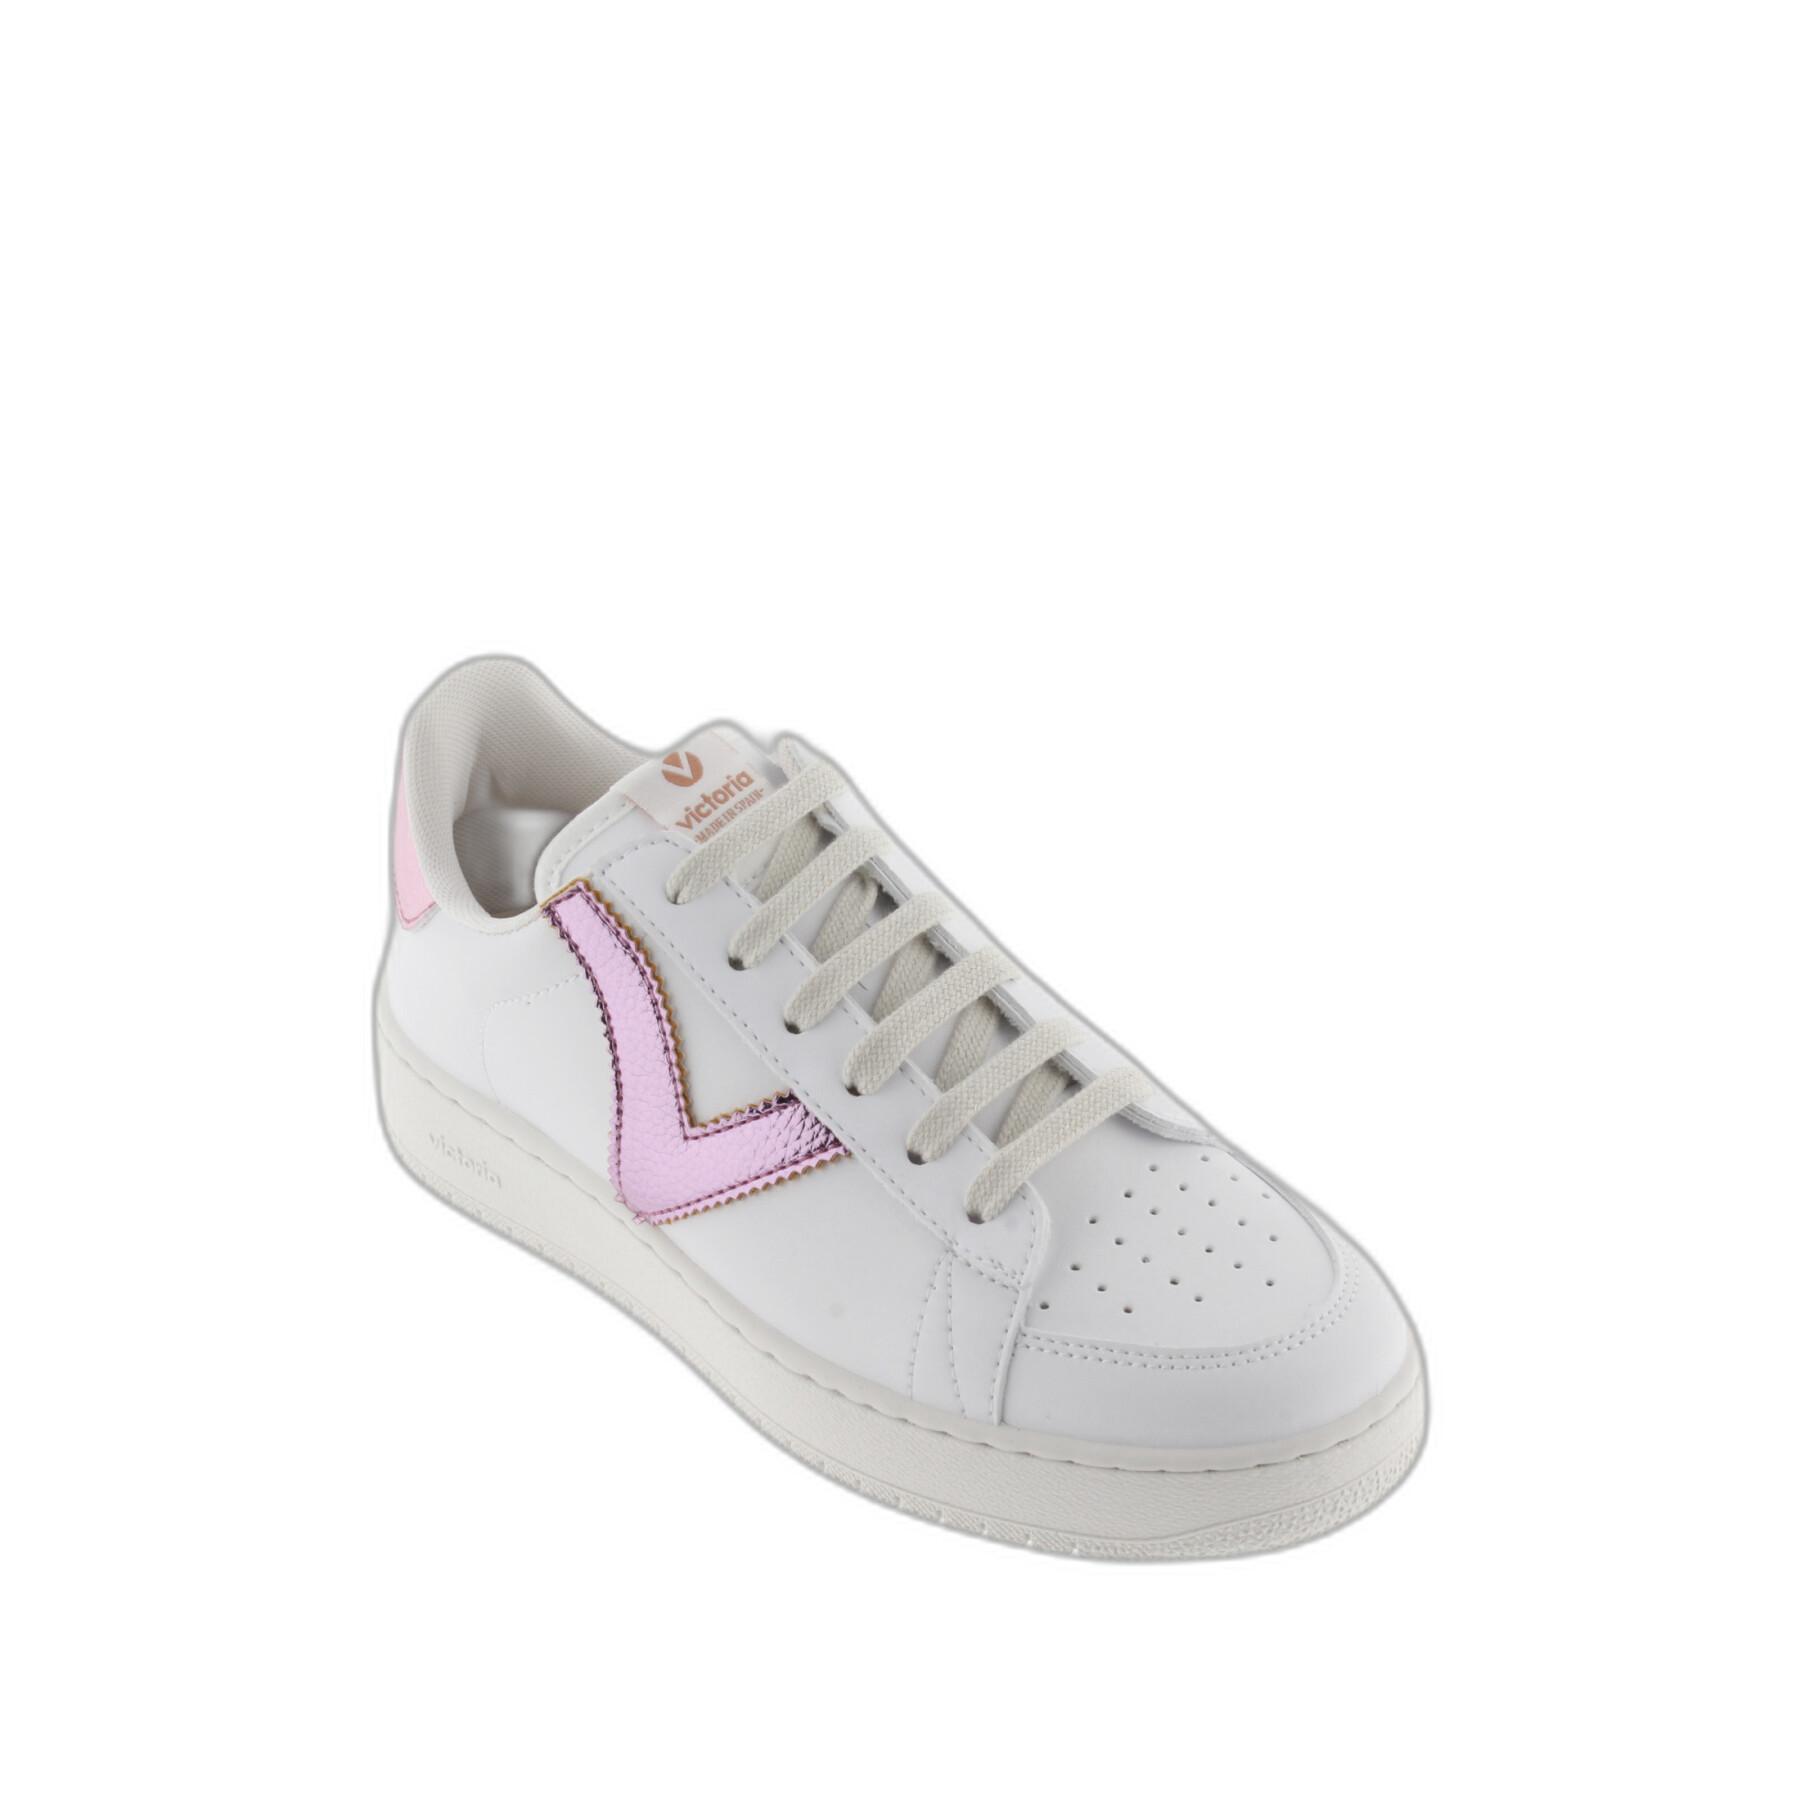 Women's leatherette and metal sneakers Victoria Madrid